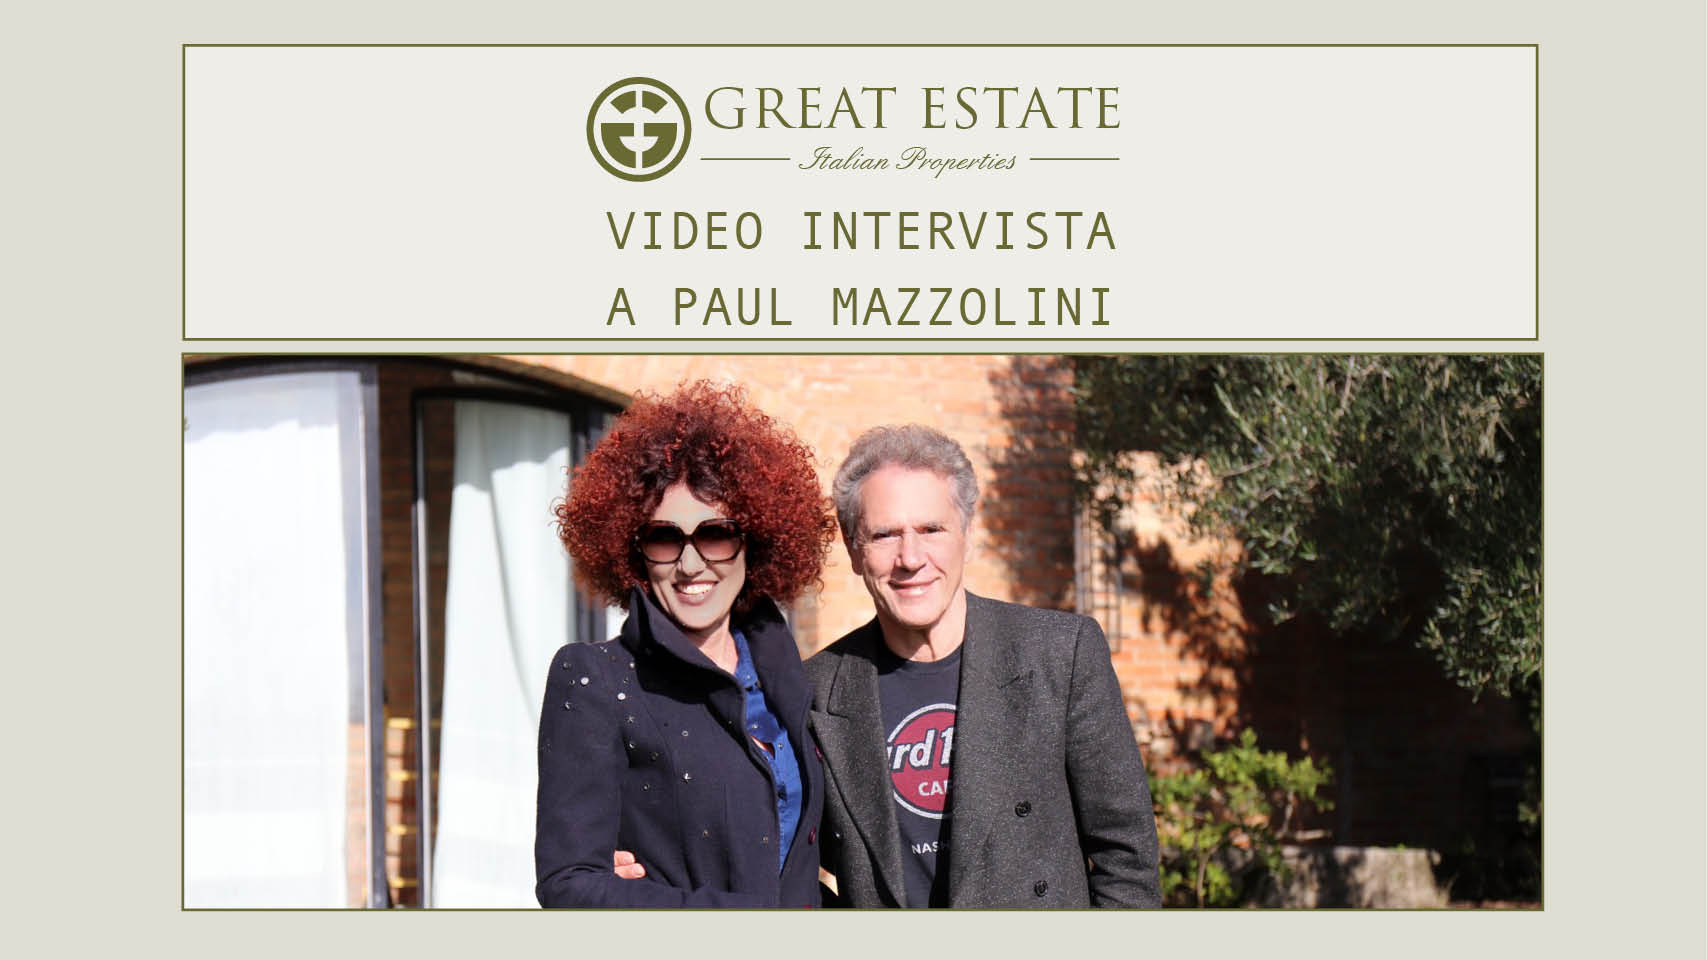 Also Paul Mazzolini chose Great Estate: here is the video interview